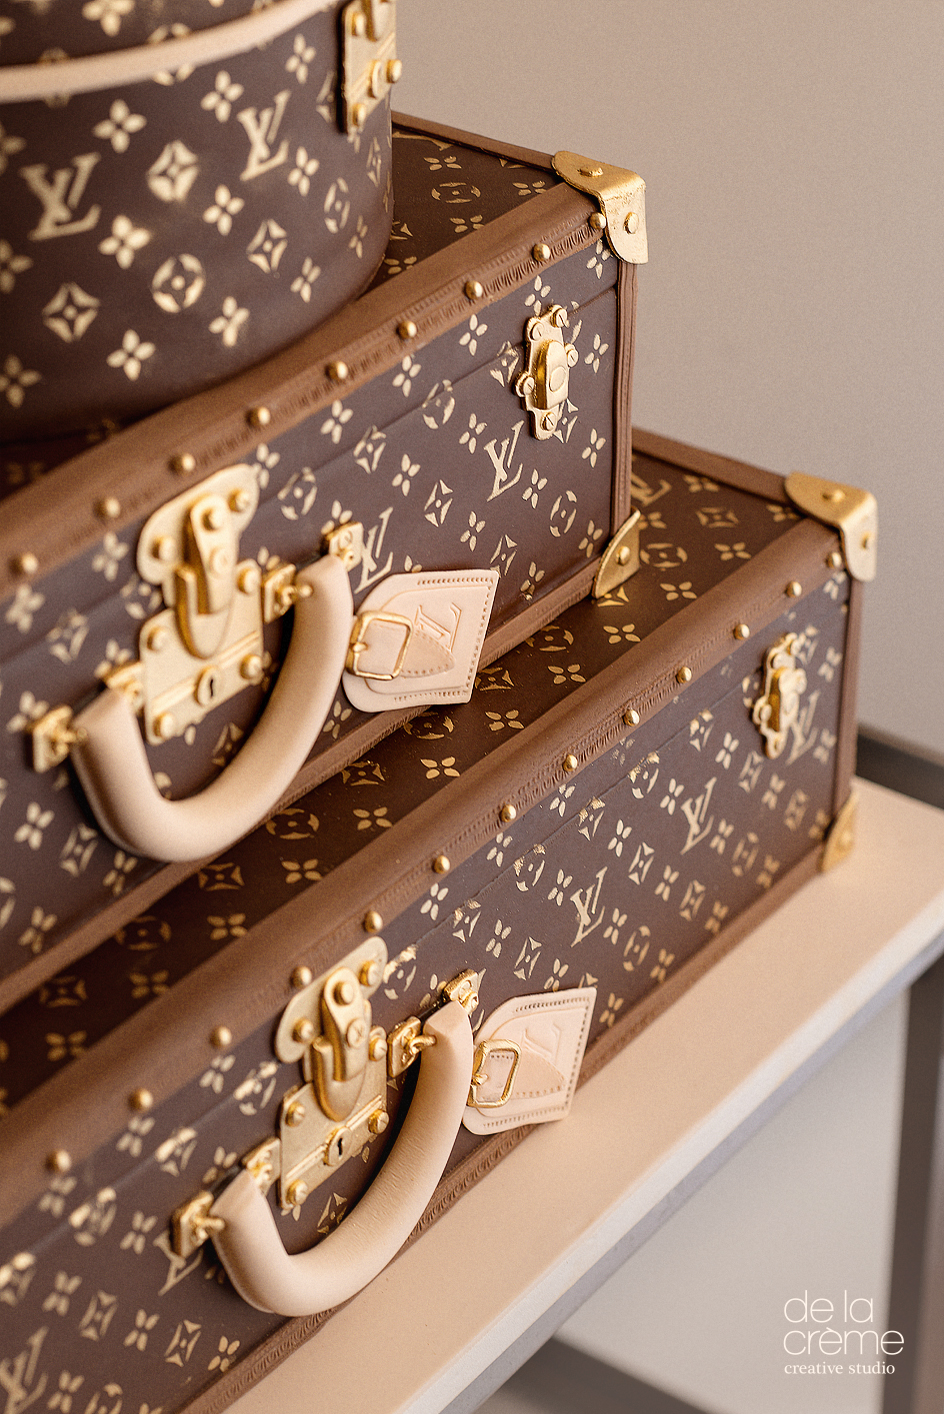 💛 LV GOLD DRIP 💛 Louis Vuitton cake - Sweet Toots Cakery